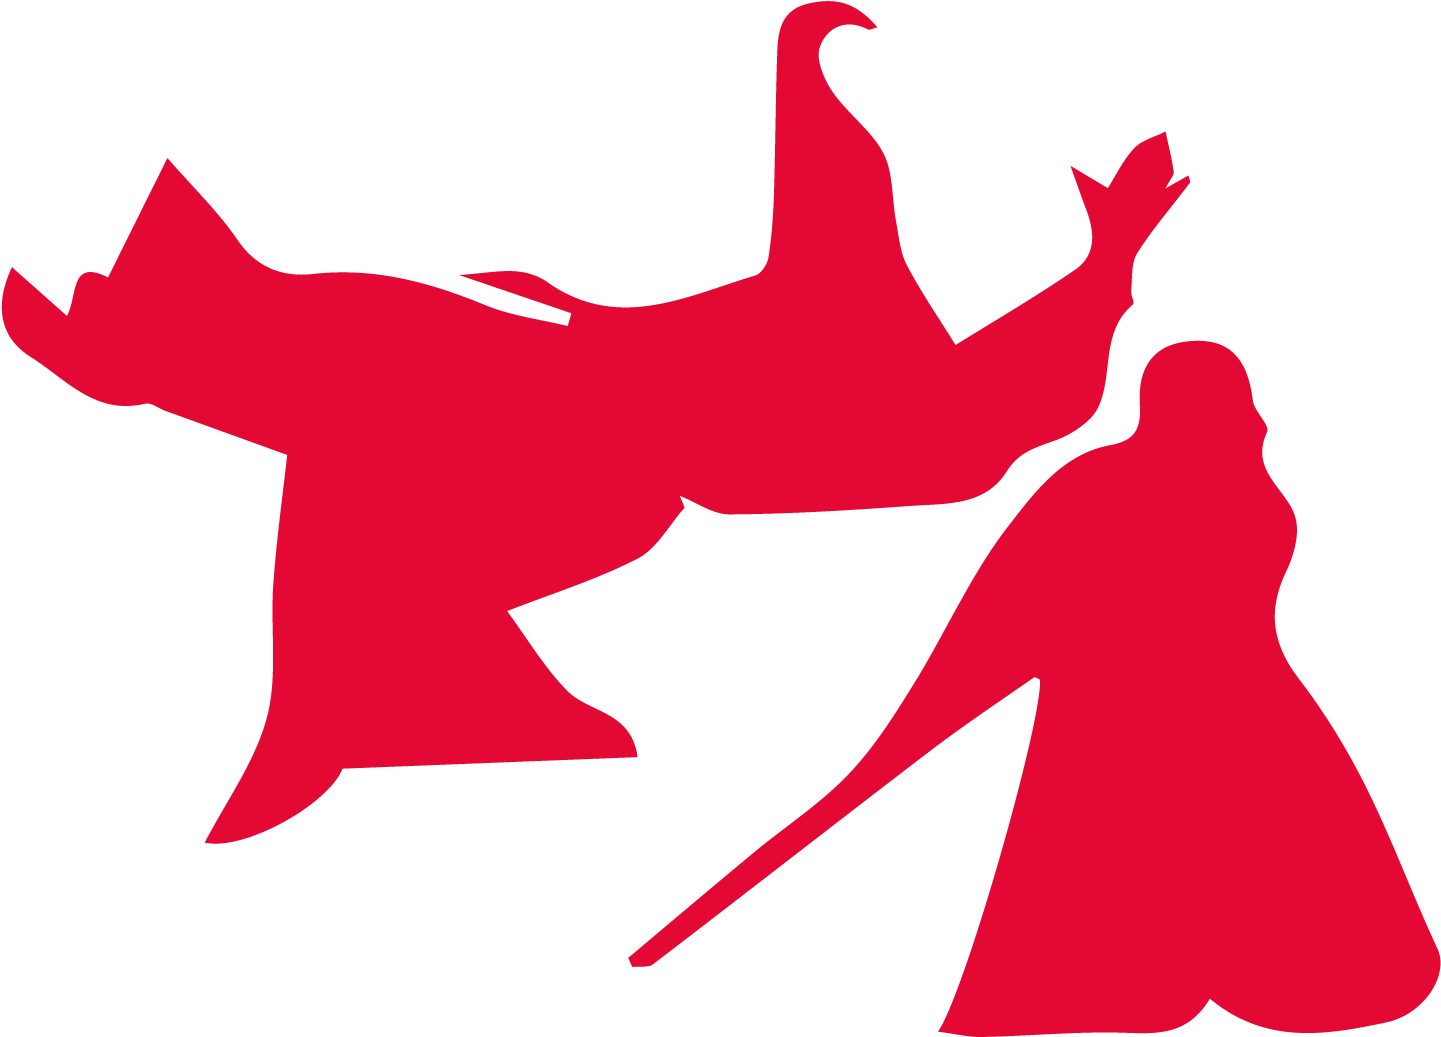 A Red Silhouettes Of Women